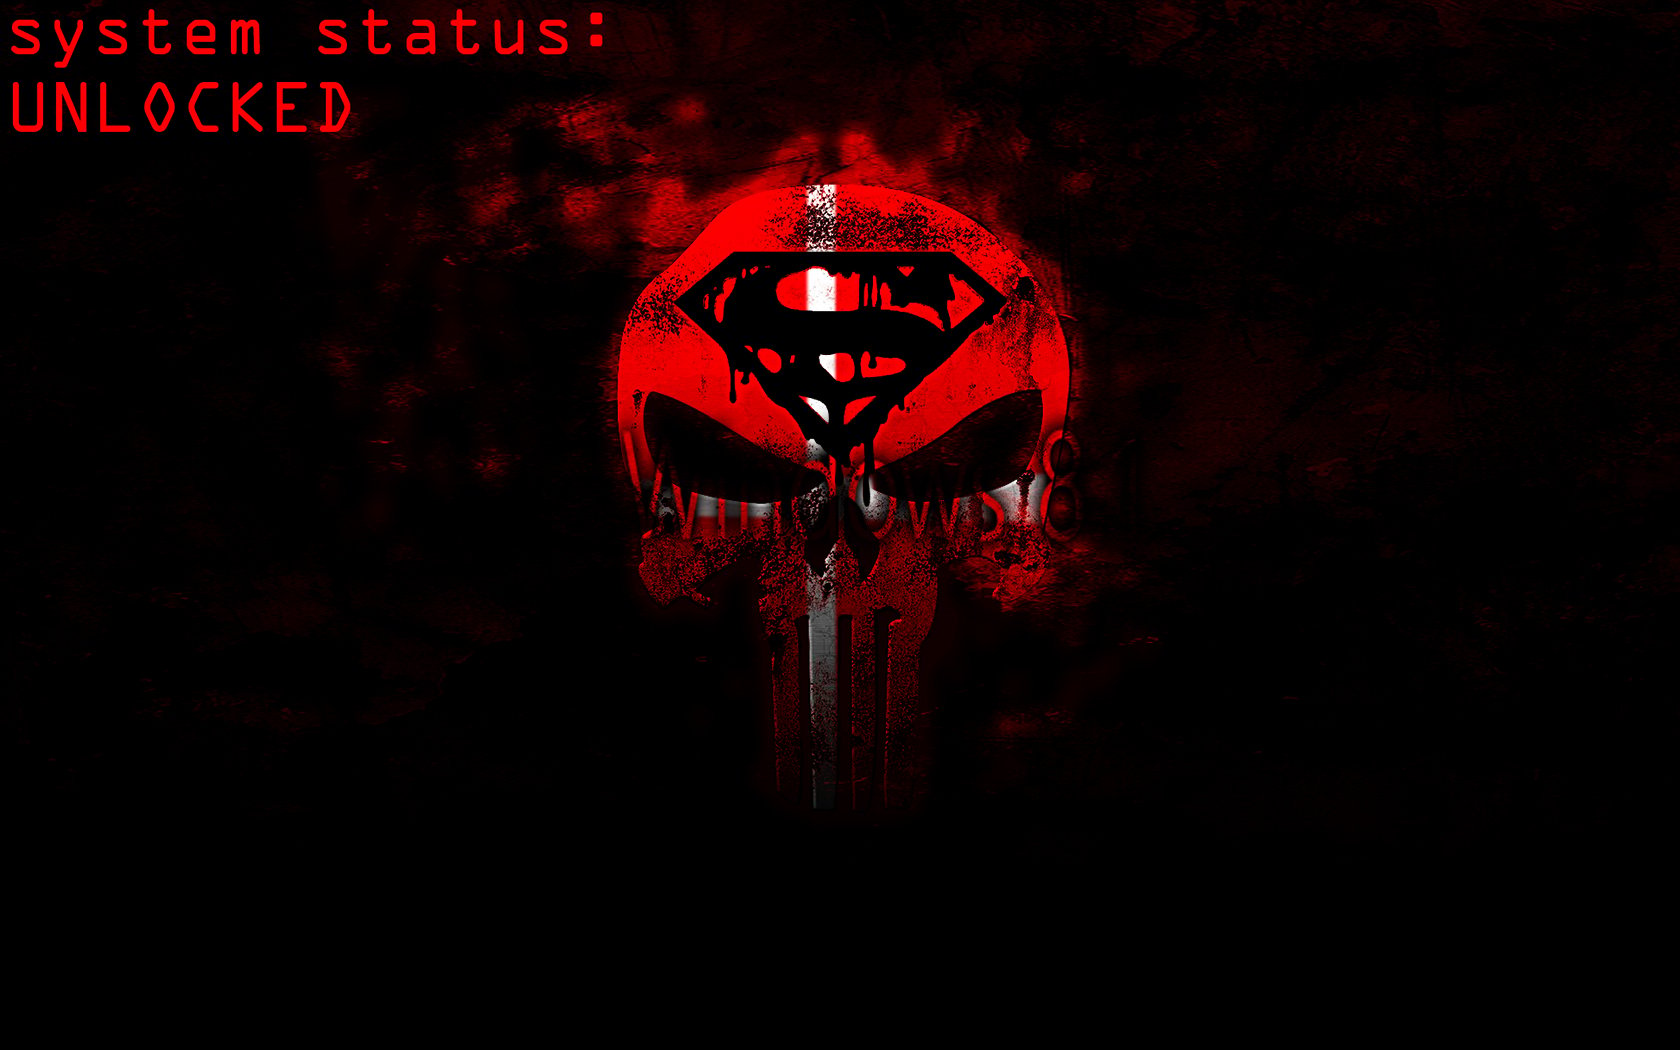 punisher logo wallpaper 2 by s1nwithm3 customization wallpaper 1680x1050